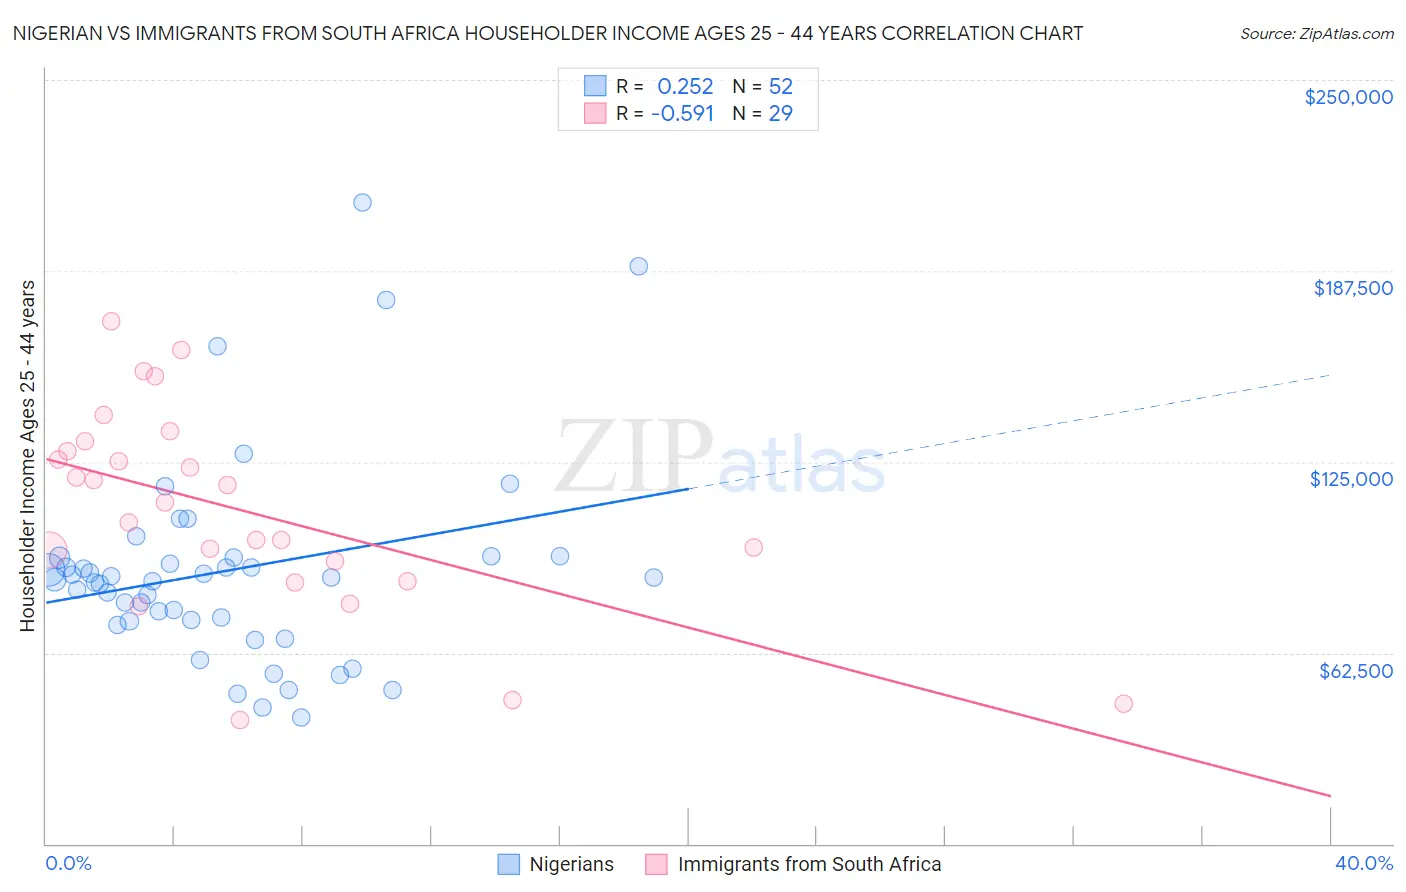 Nigerian vs Immigrants from South Africa Householder Income Ages 25 - 44 years